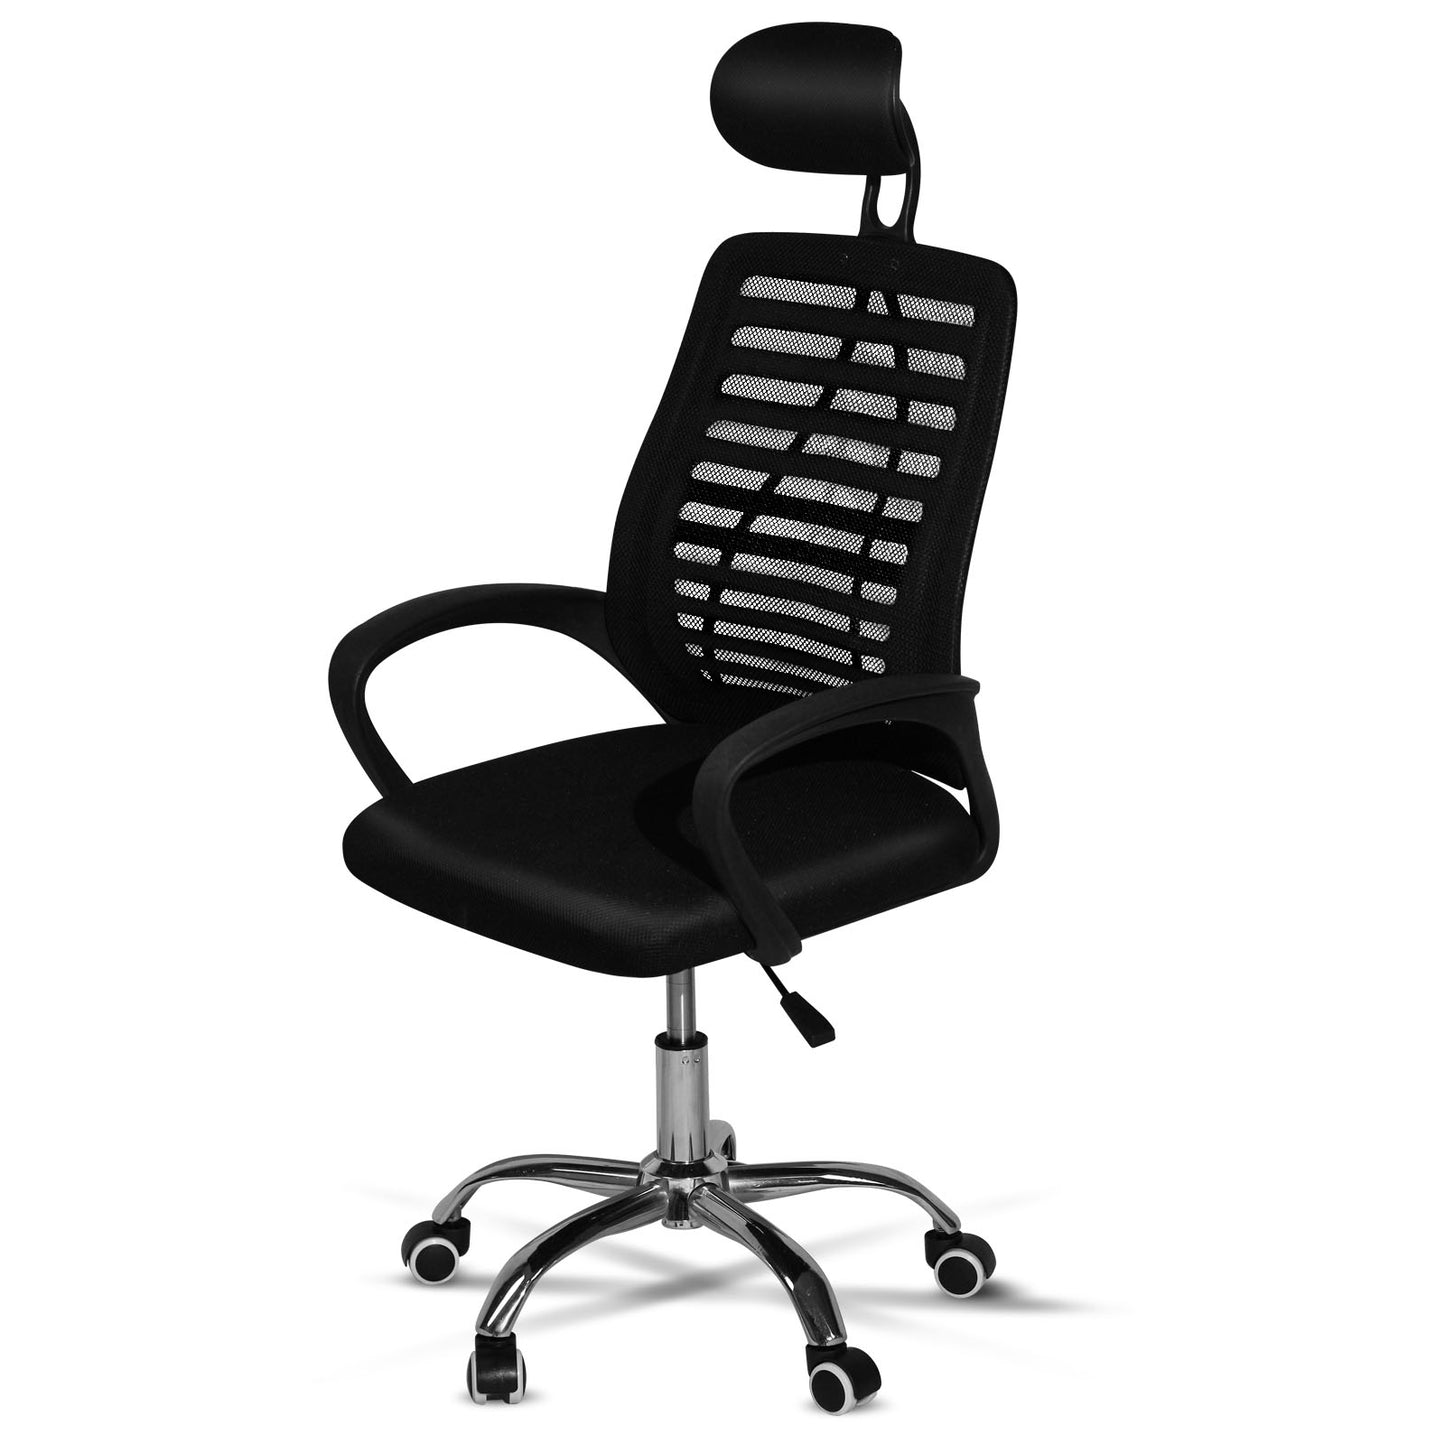 SKY-TOUCH Office Chair,Comfort Ergonomic Height Adjustable Desk Chair with Lumbar Support Backrest Black